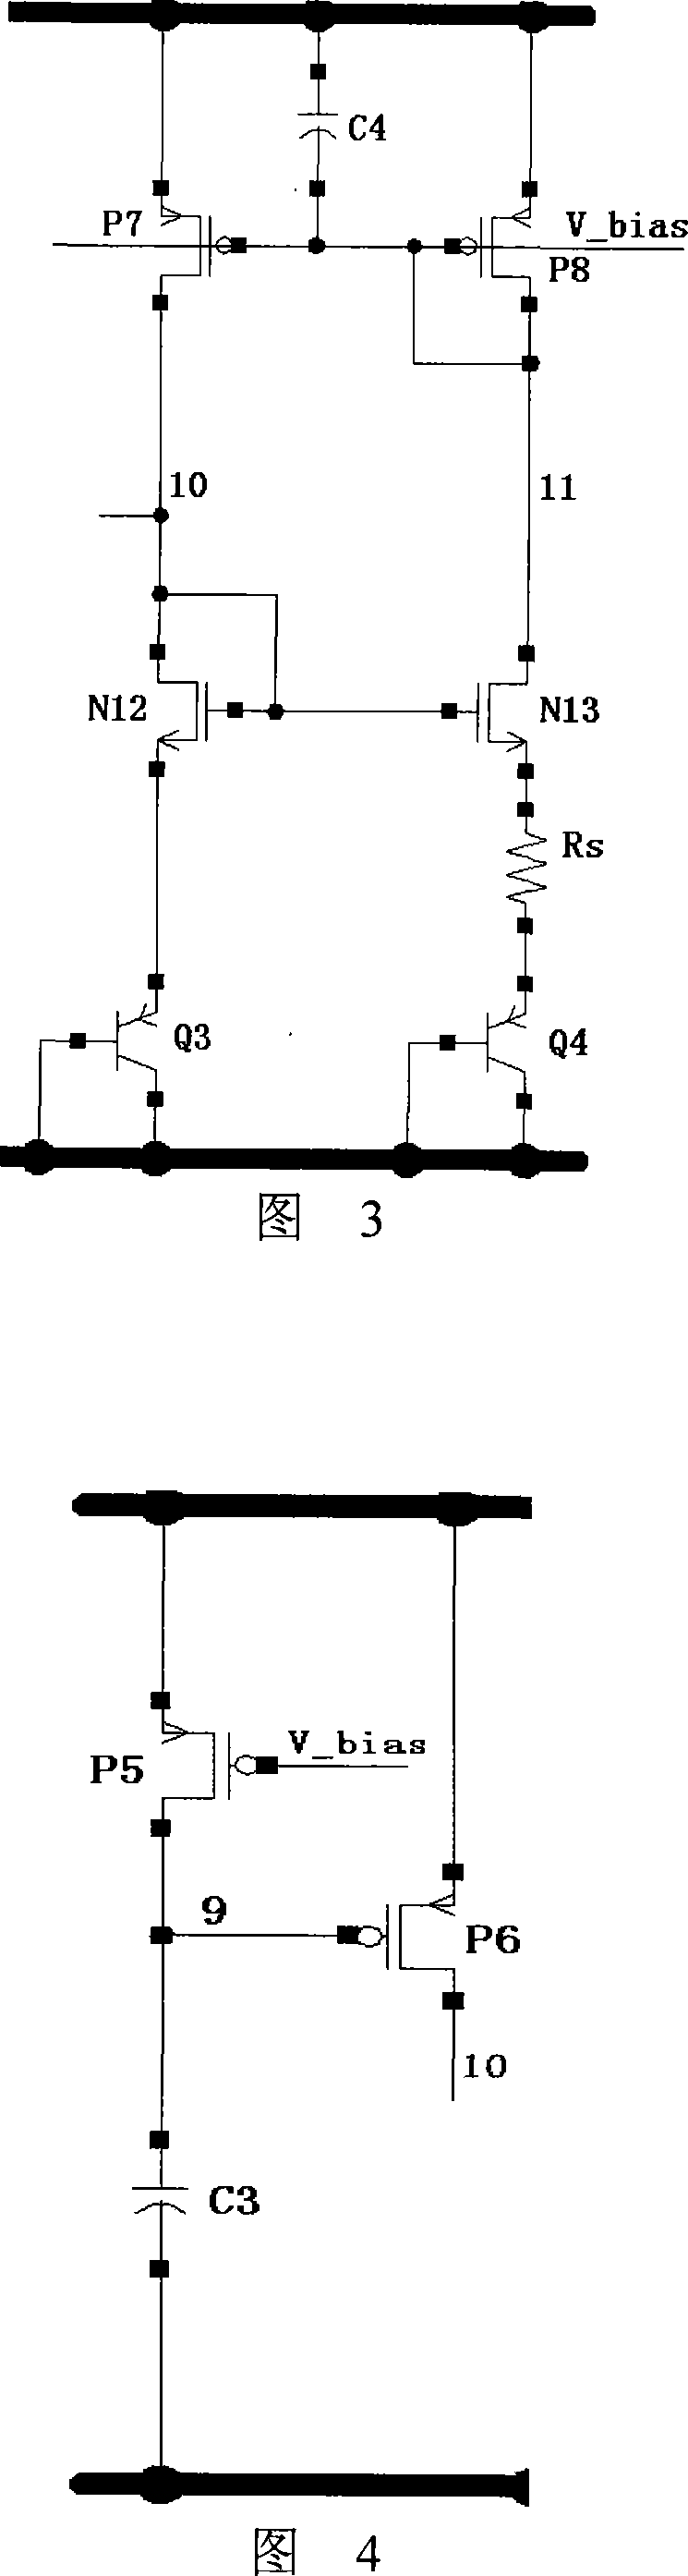 Reference circuit for restraining misadjusted CMOS energy gap